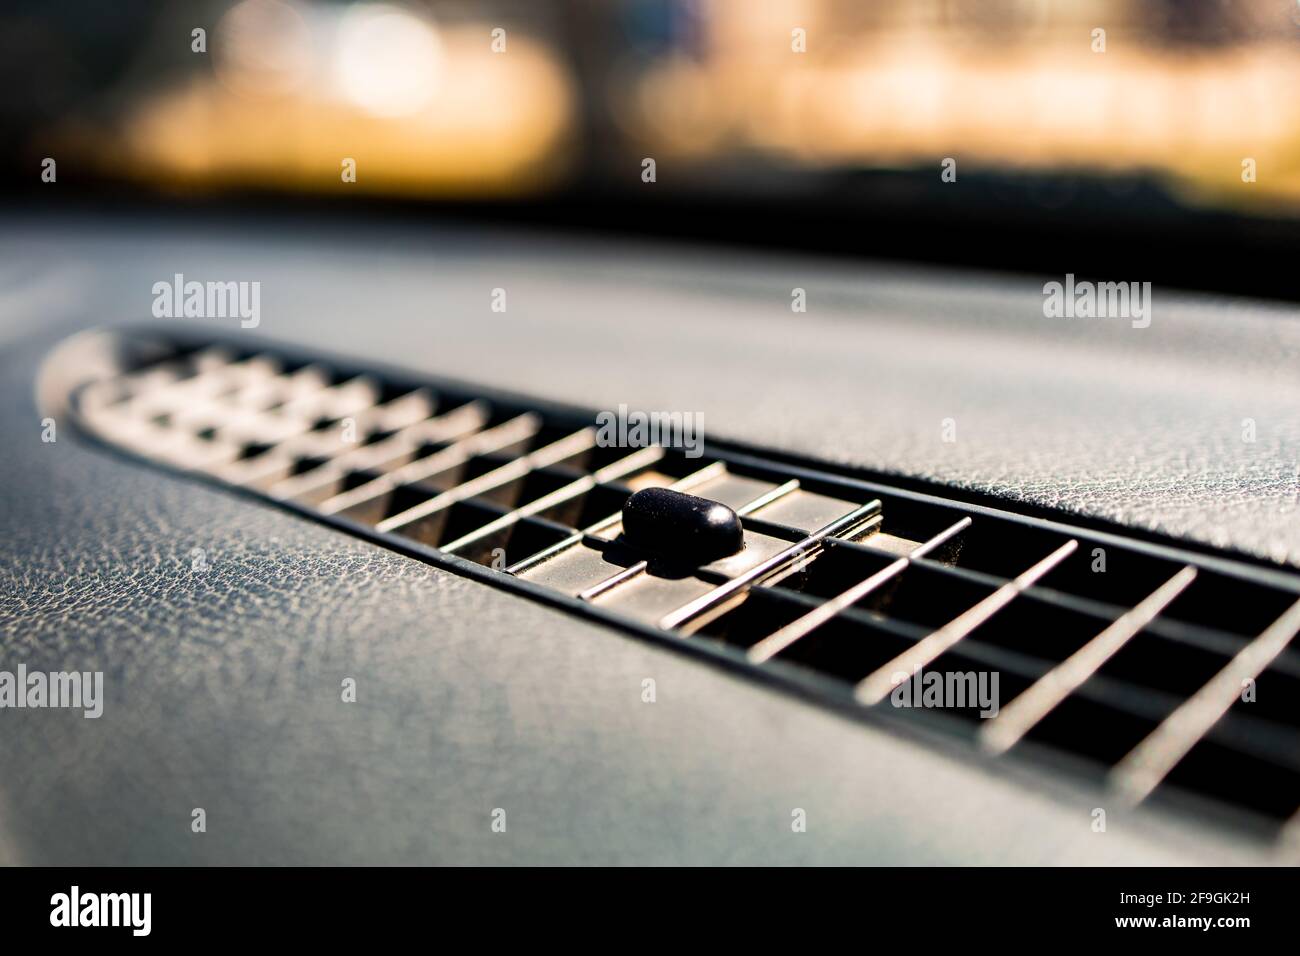 Close-up of car ventilation system panel inside the vehicle Stock Photo